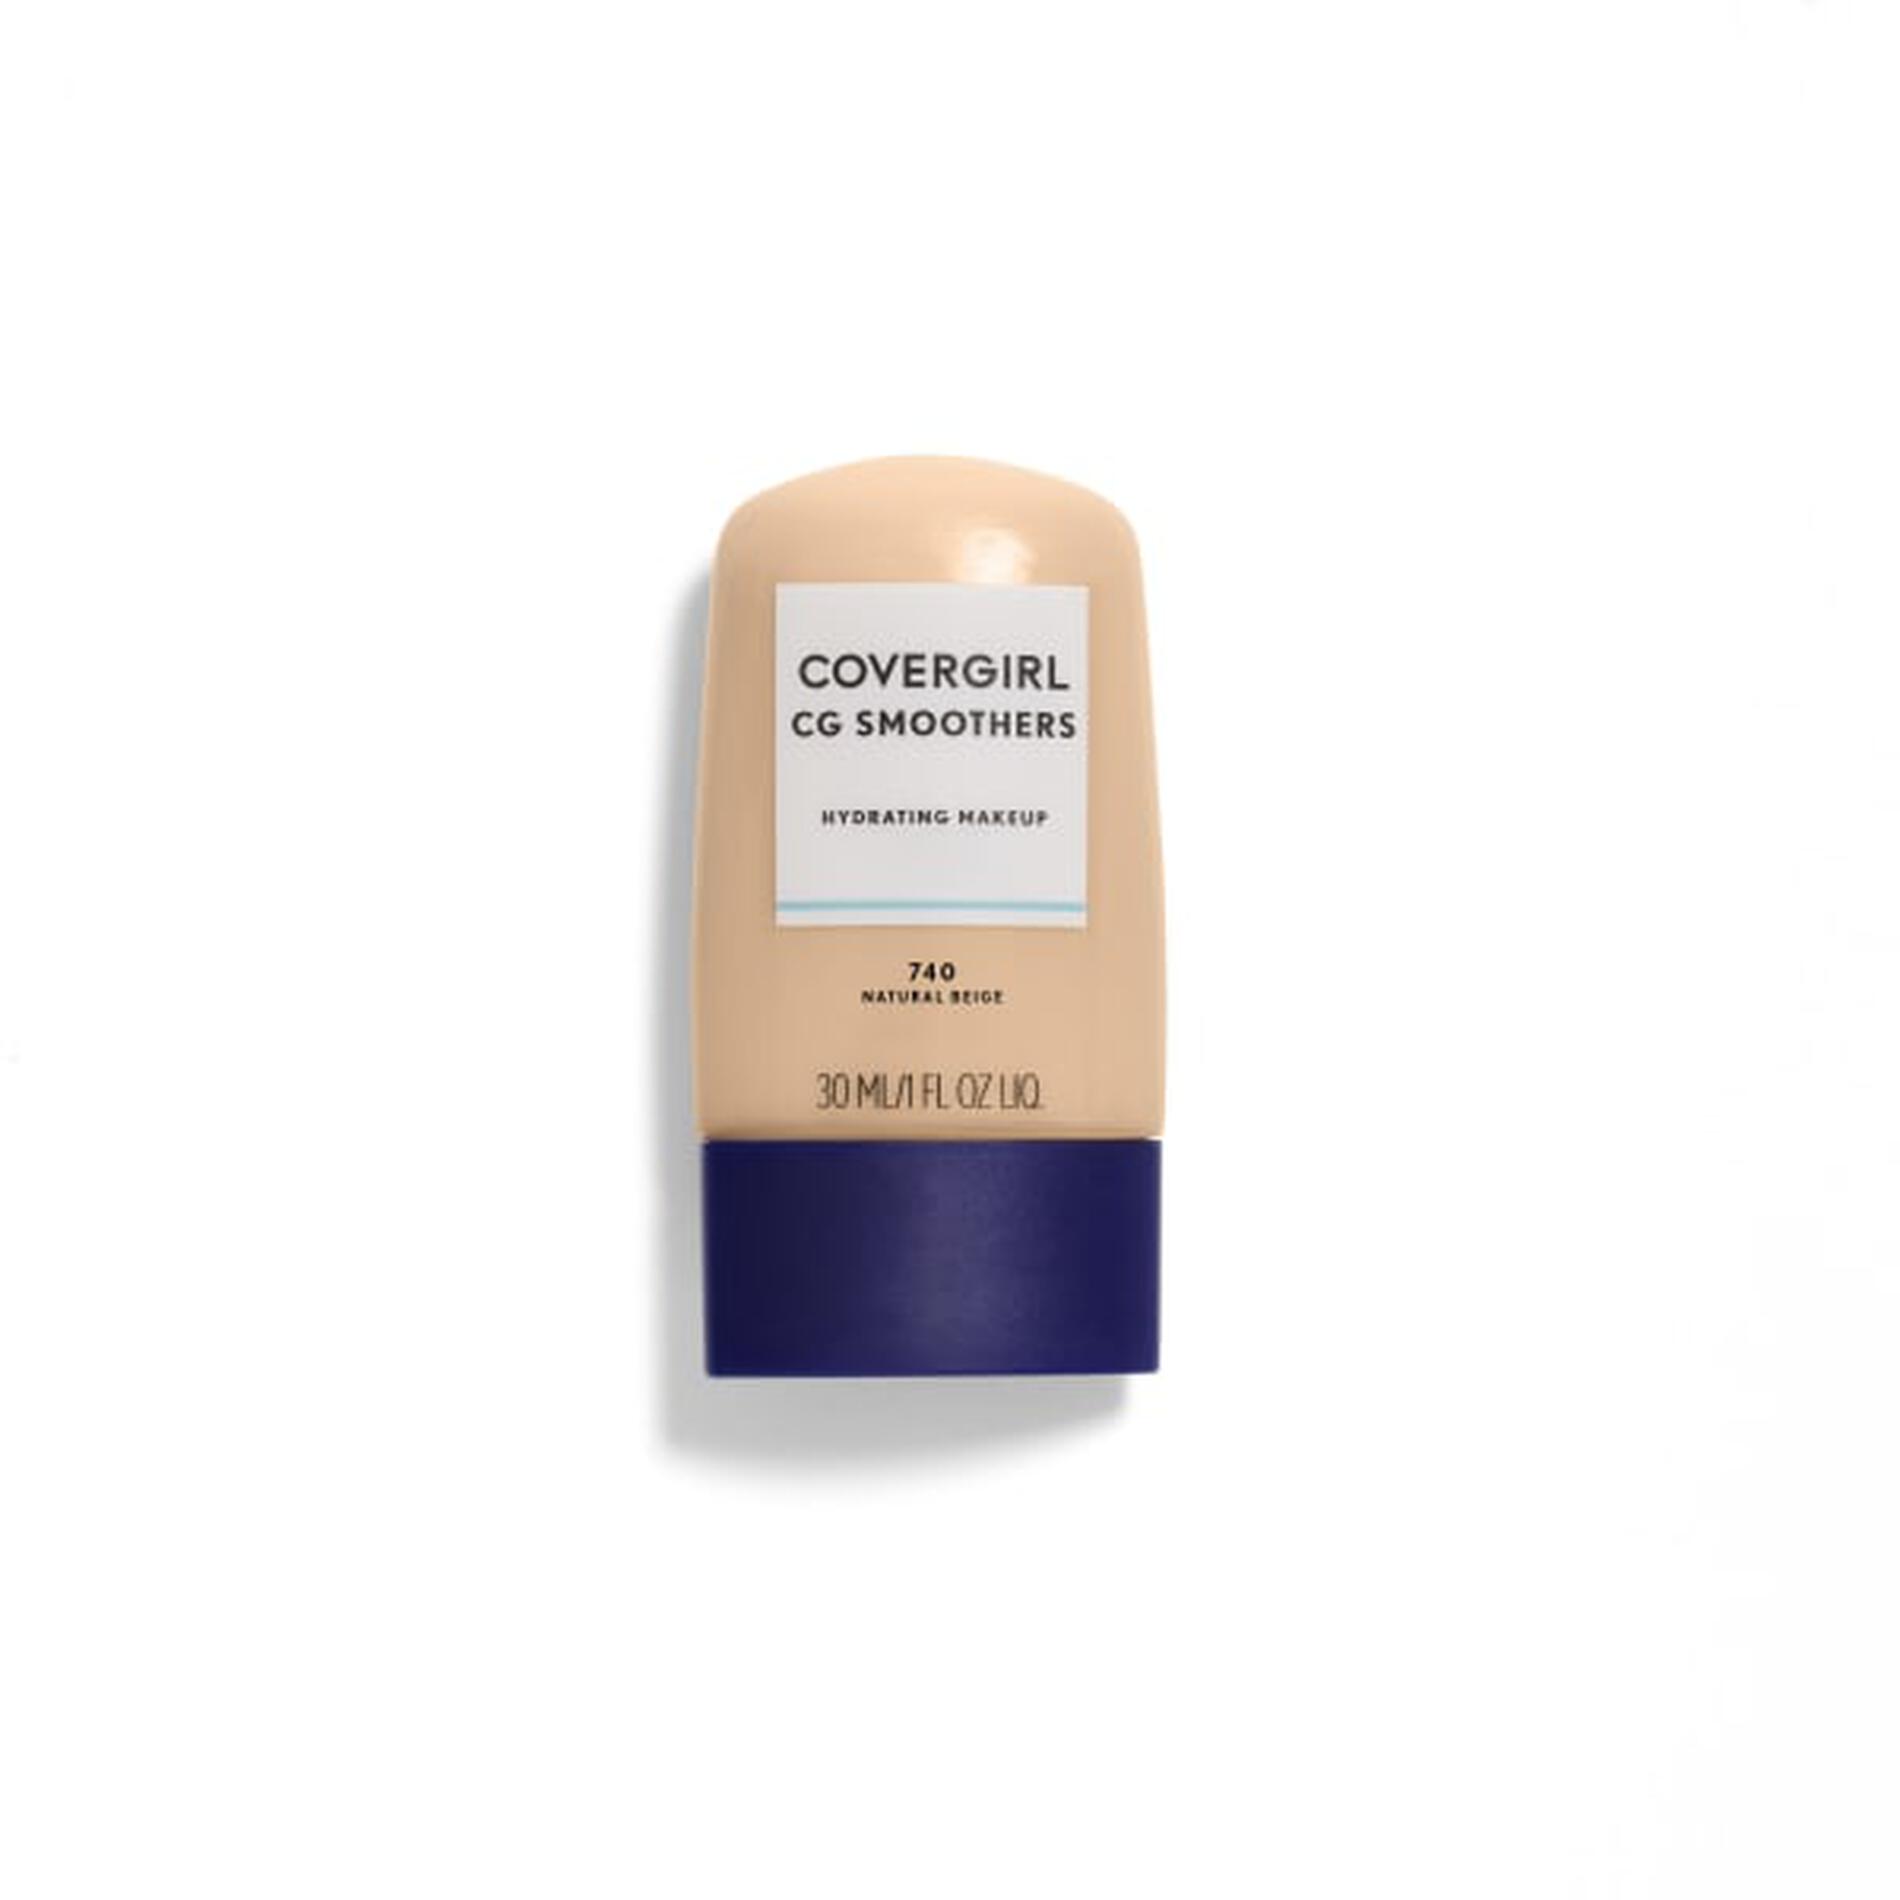 Covergirl CG Smoothers Hydrating Makeup Foundation 